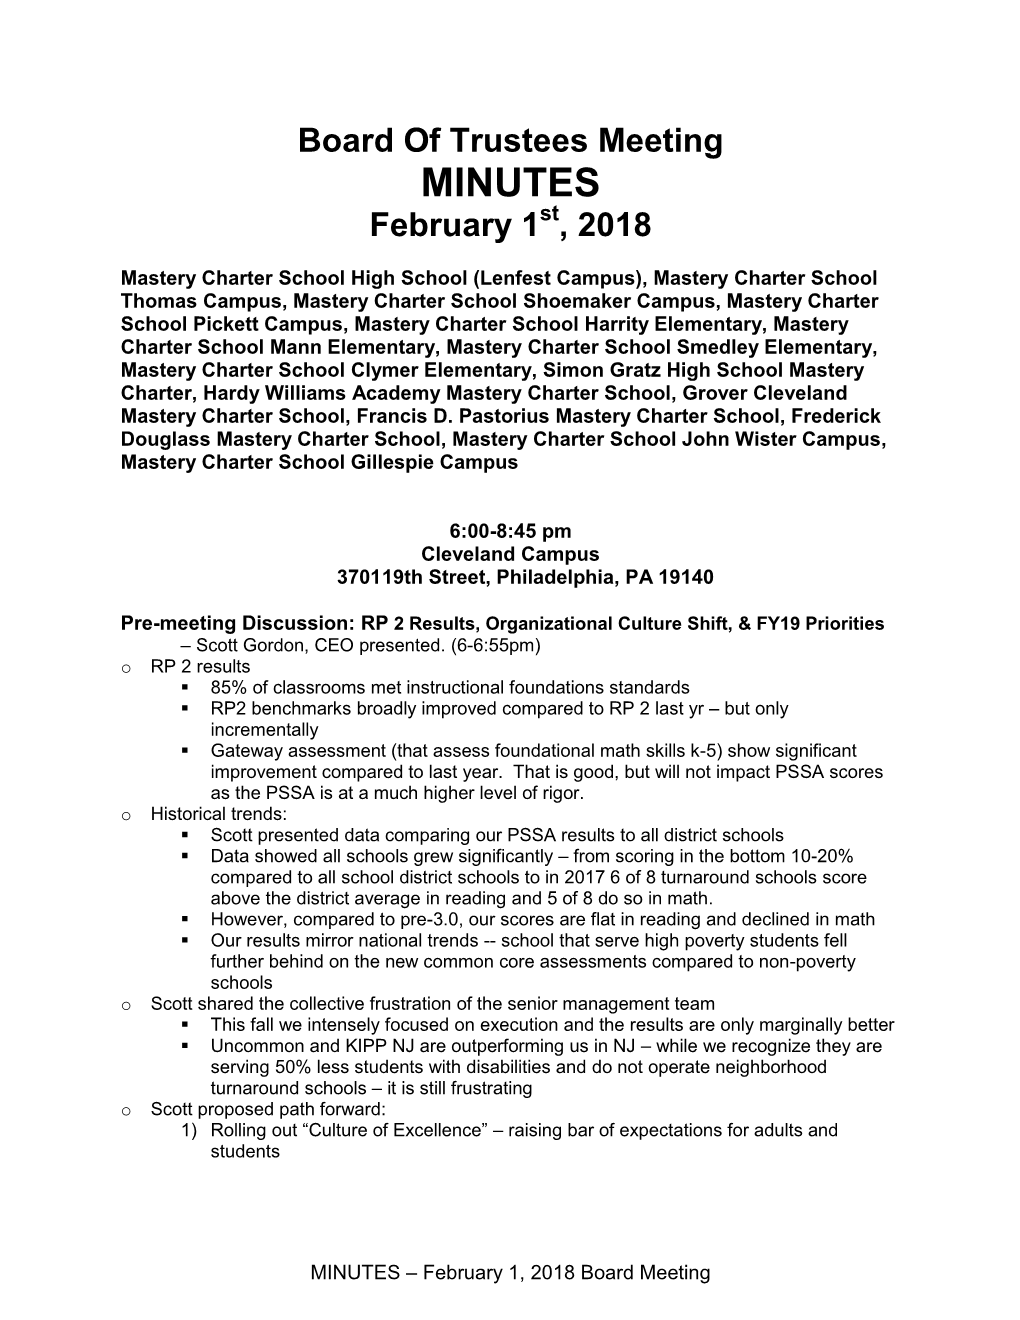 Mastery Charter Schools PA Board Minutes 2018.02.01